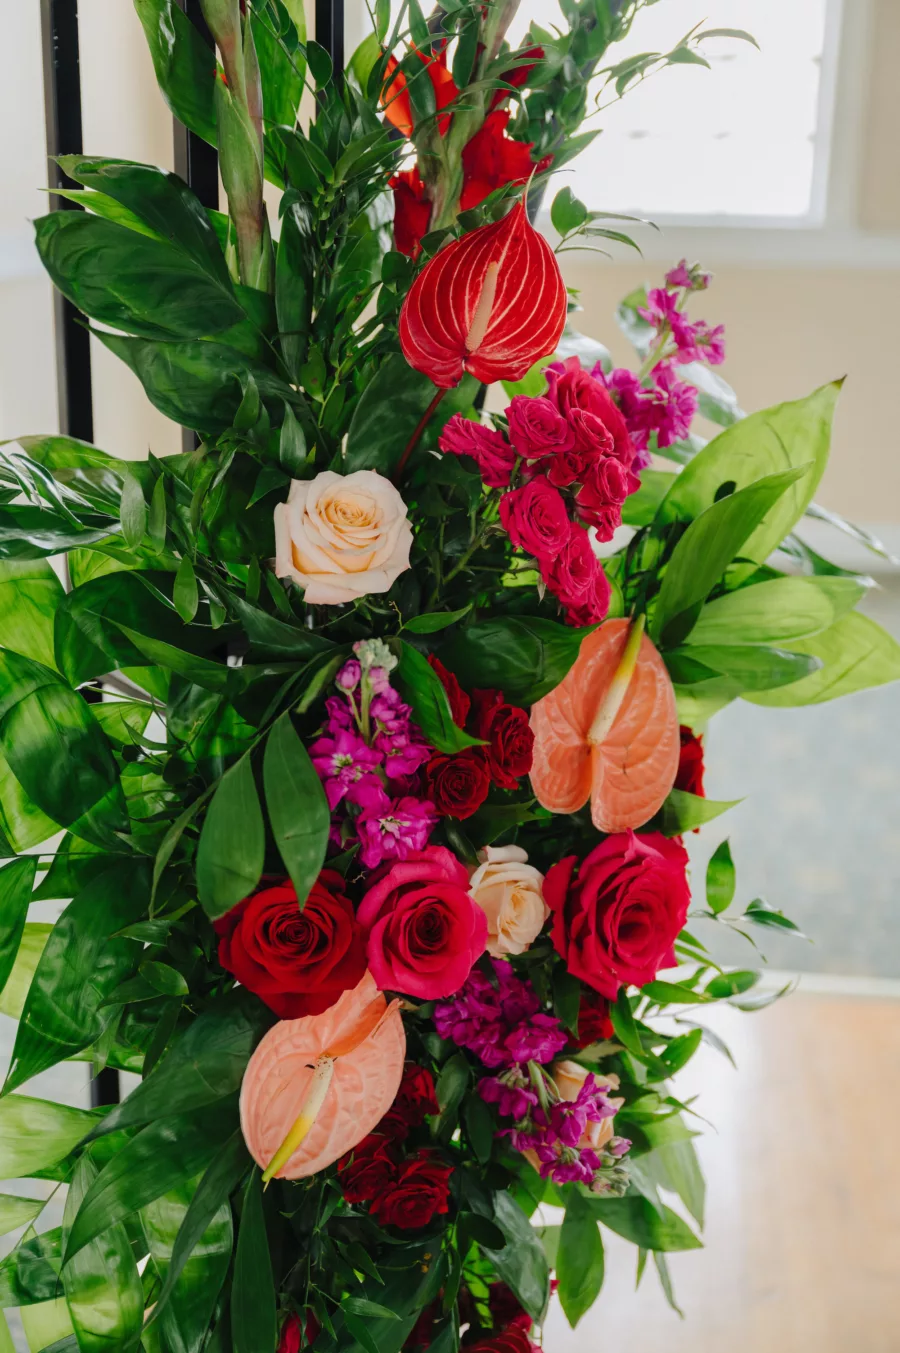 Cake Table Arbor Floral Arrangement with Pink and Red Roses, Red Anthurium, Pink Stock Flowers, and Greenery | Tampa Bay Florist Save The Date Florida